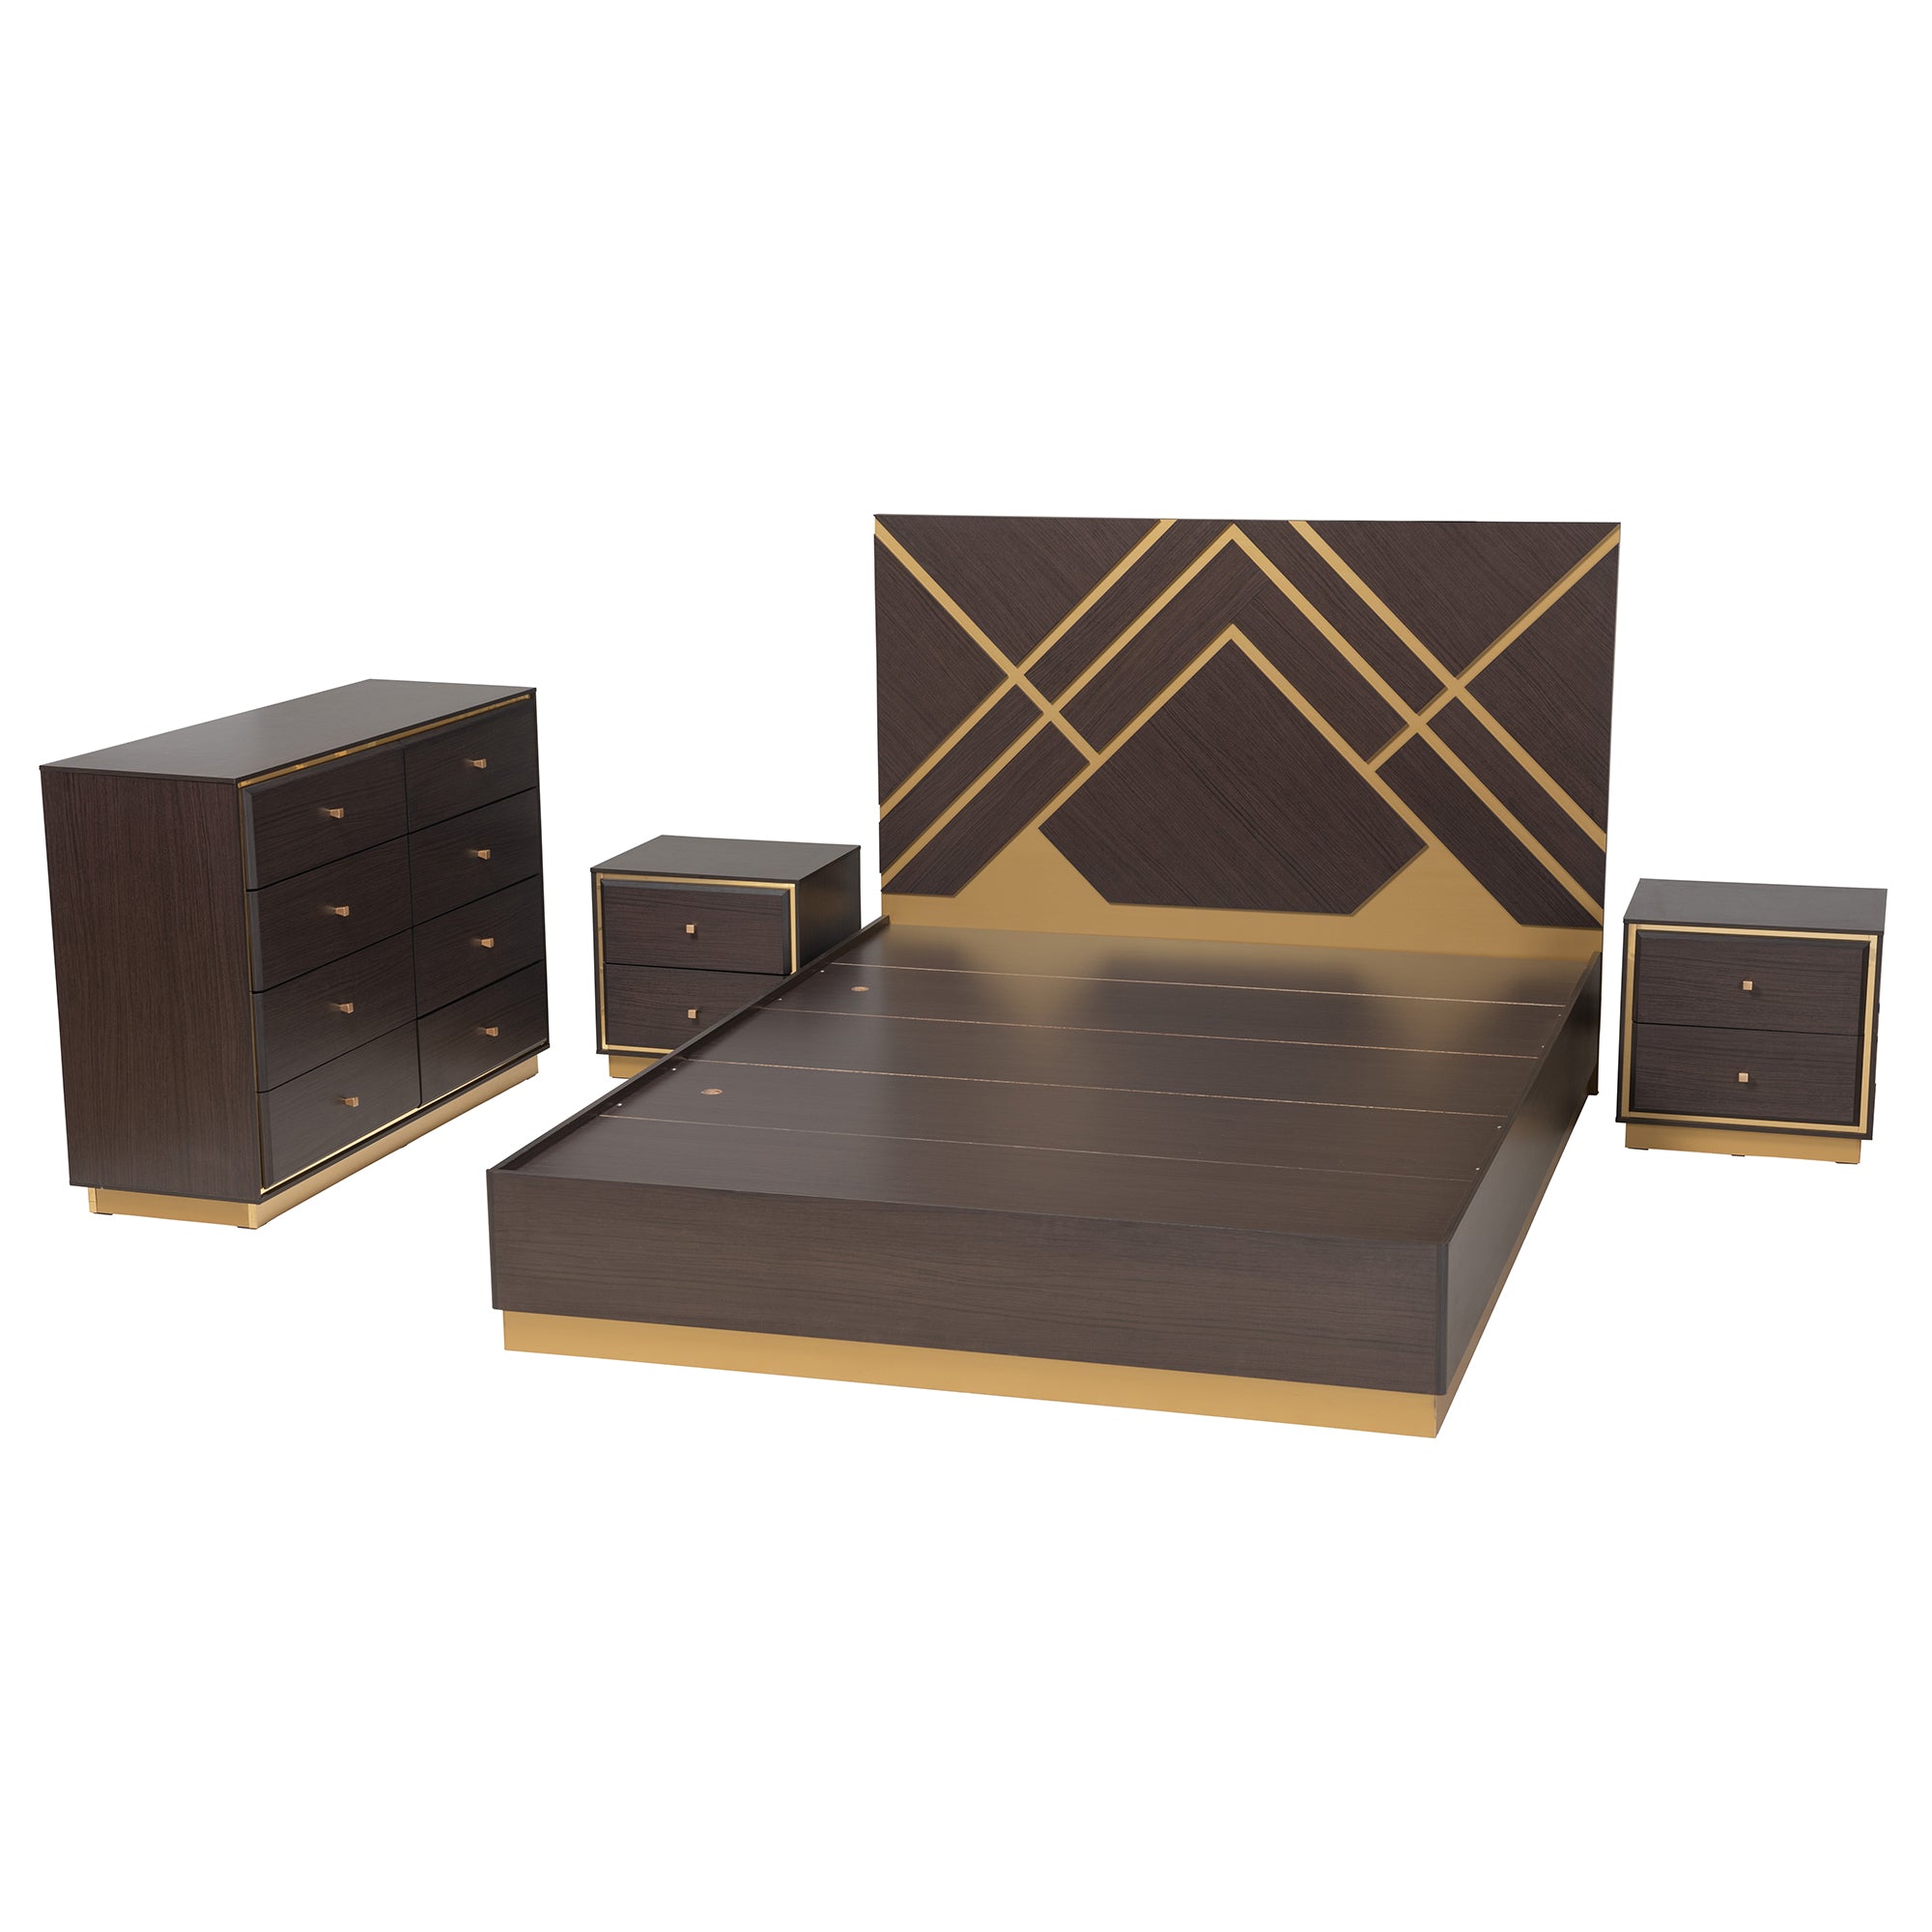 Arcelia Contemporary Bed & Nightstands & Dresser Two-Tone 4-Piece-Bedroom Set-Baxton Studio - WI-Wall2Wall Furnishings